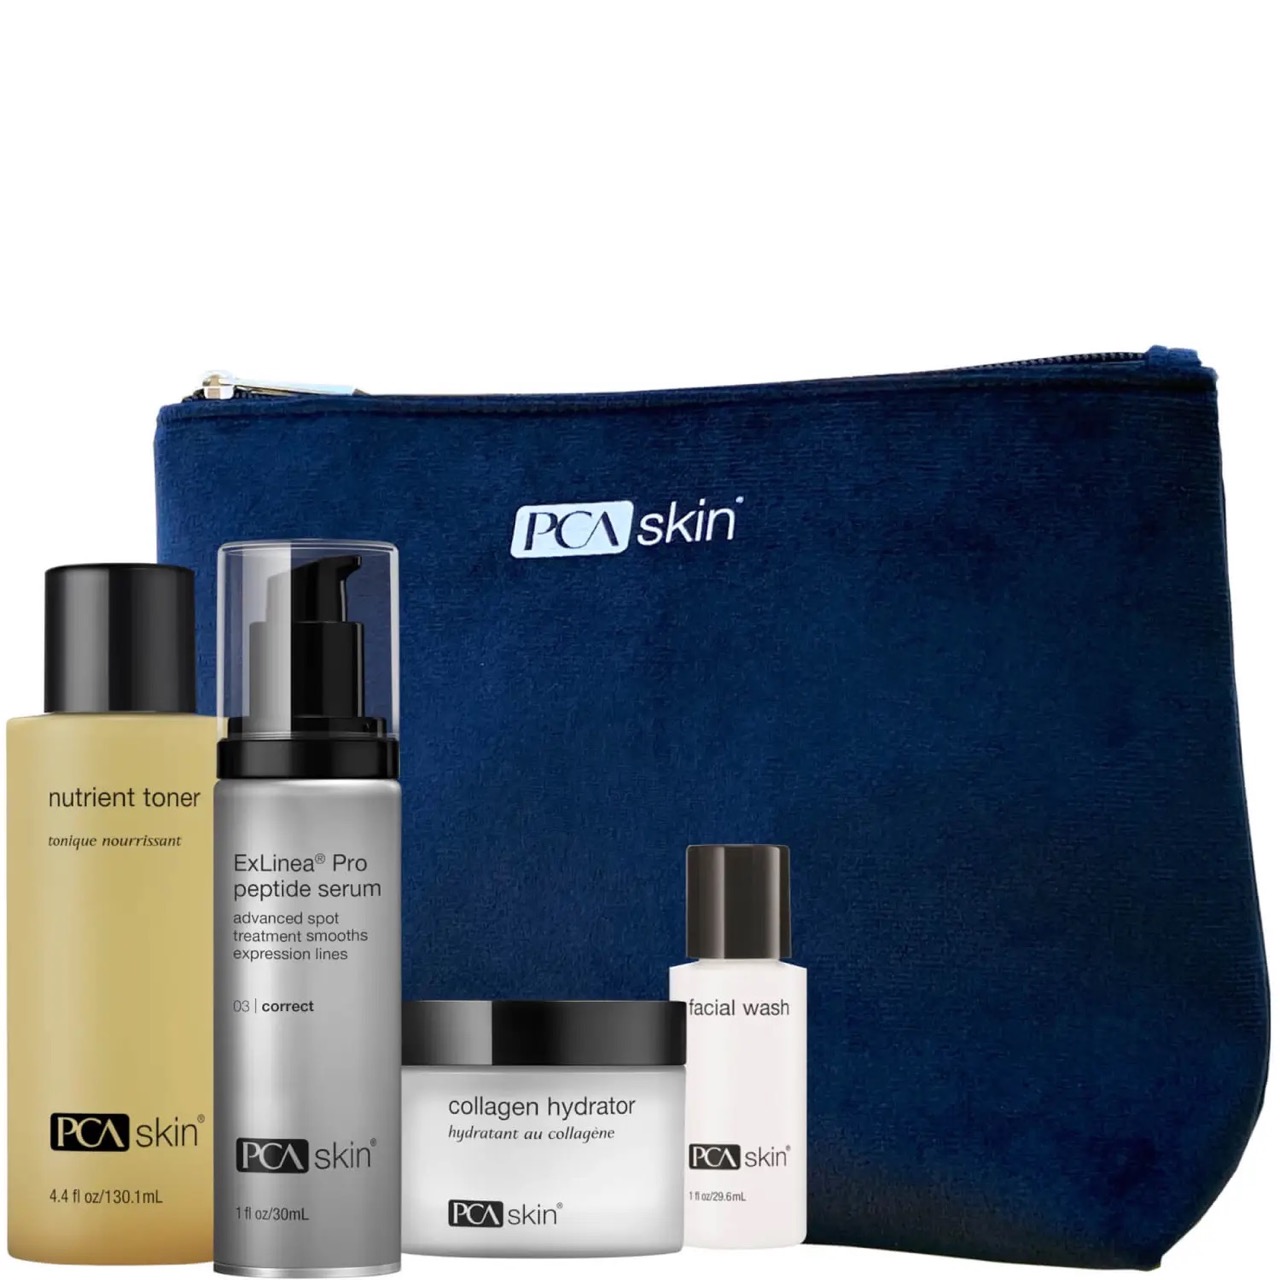 A Dermstore gift set in a blue pouch.